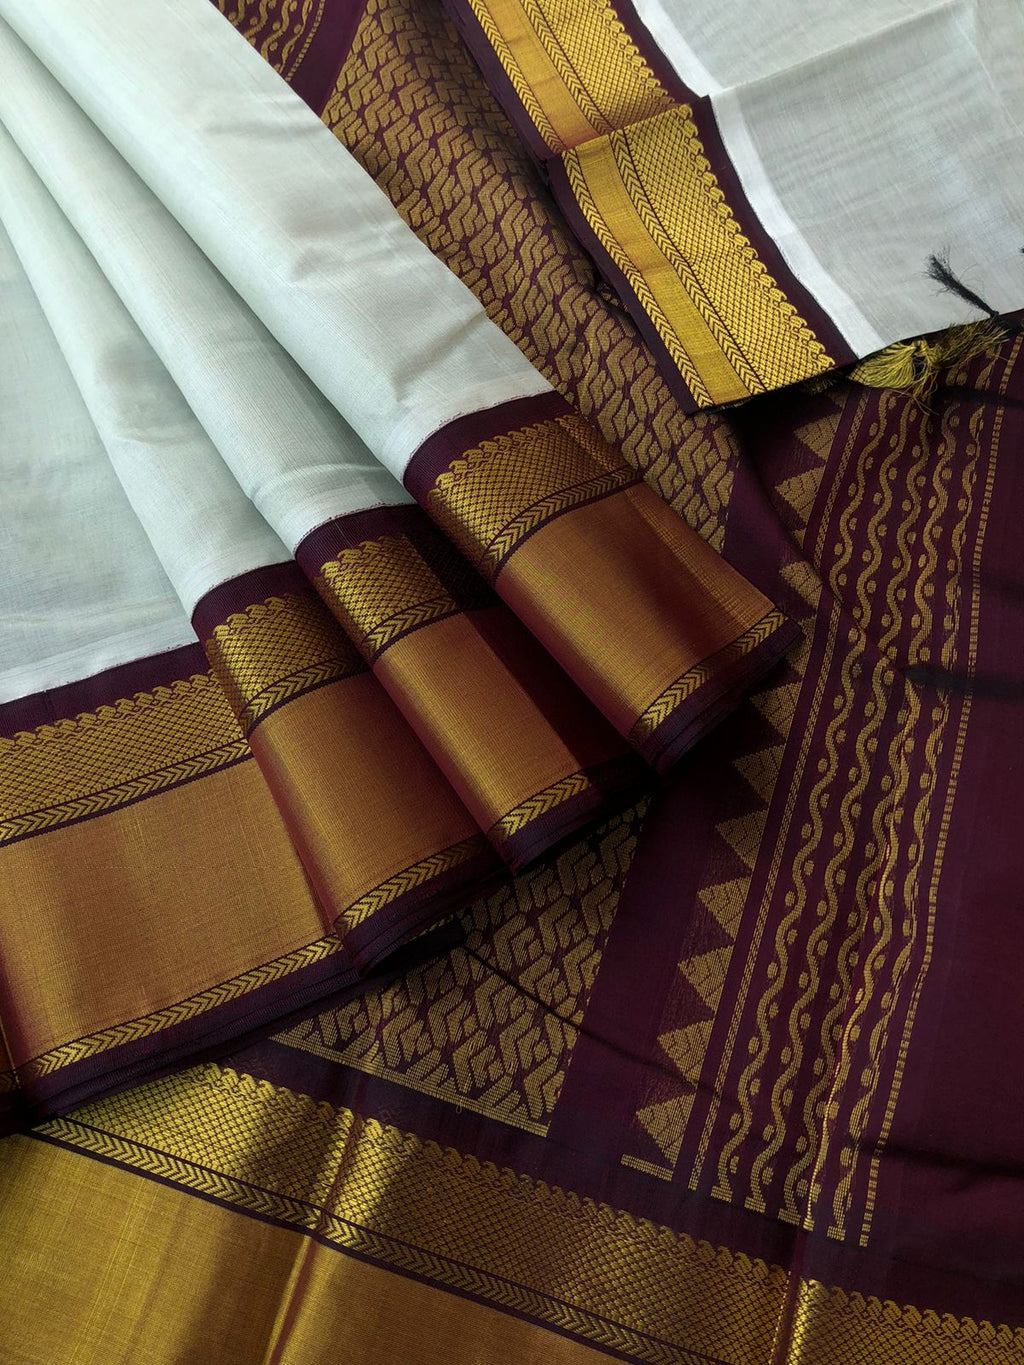 Korvai Silk Cotton -greyish off white and brown